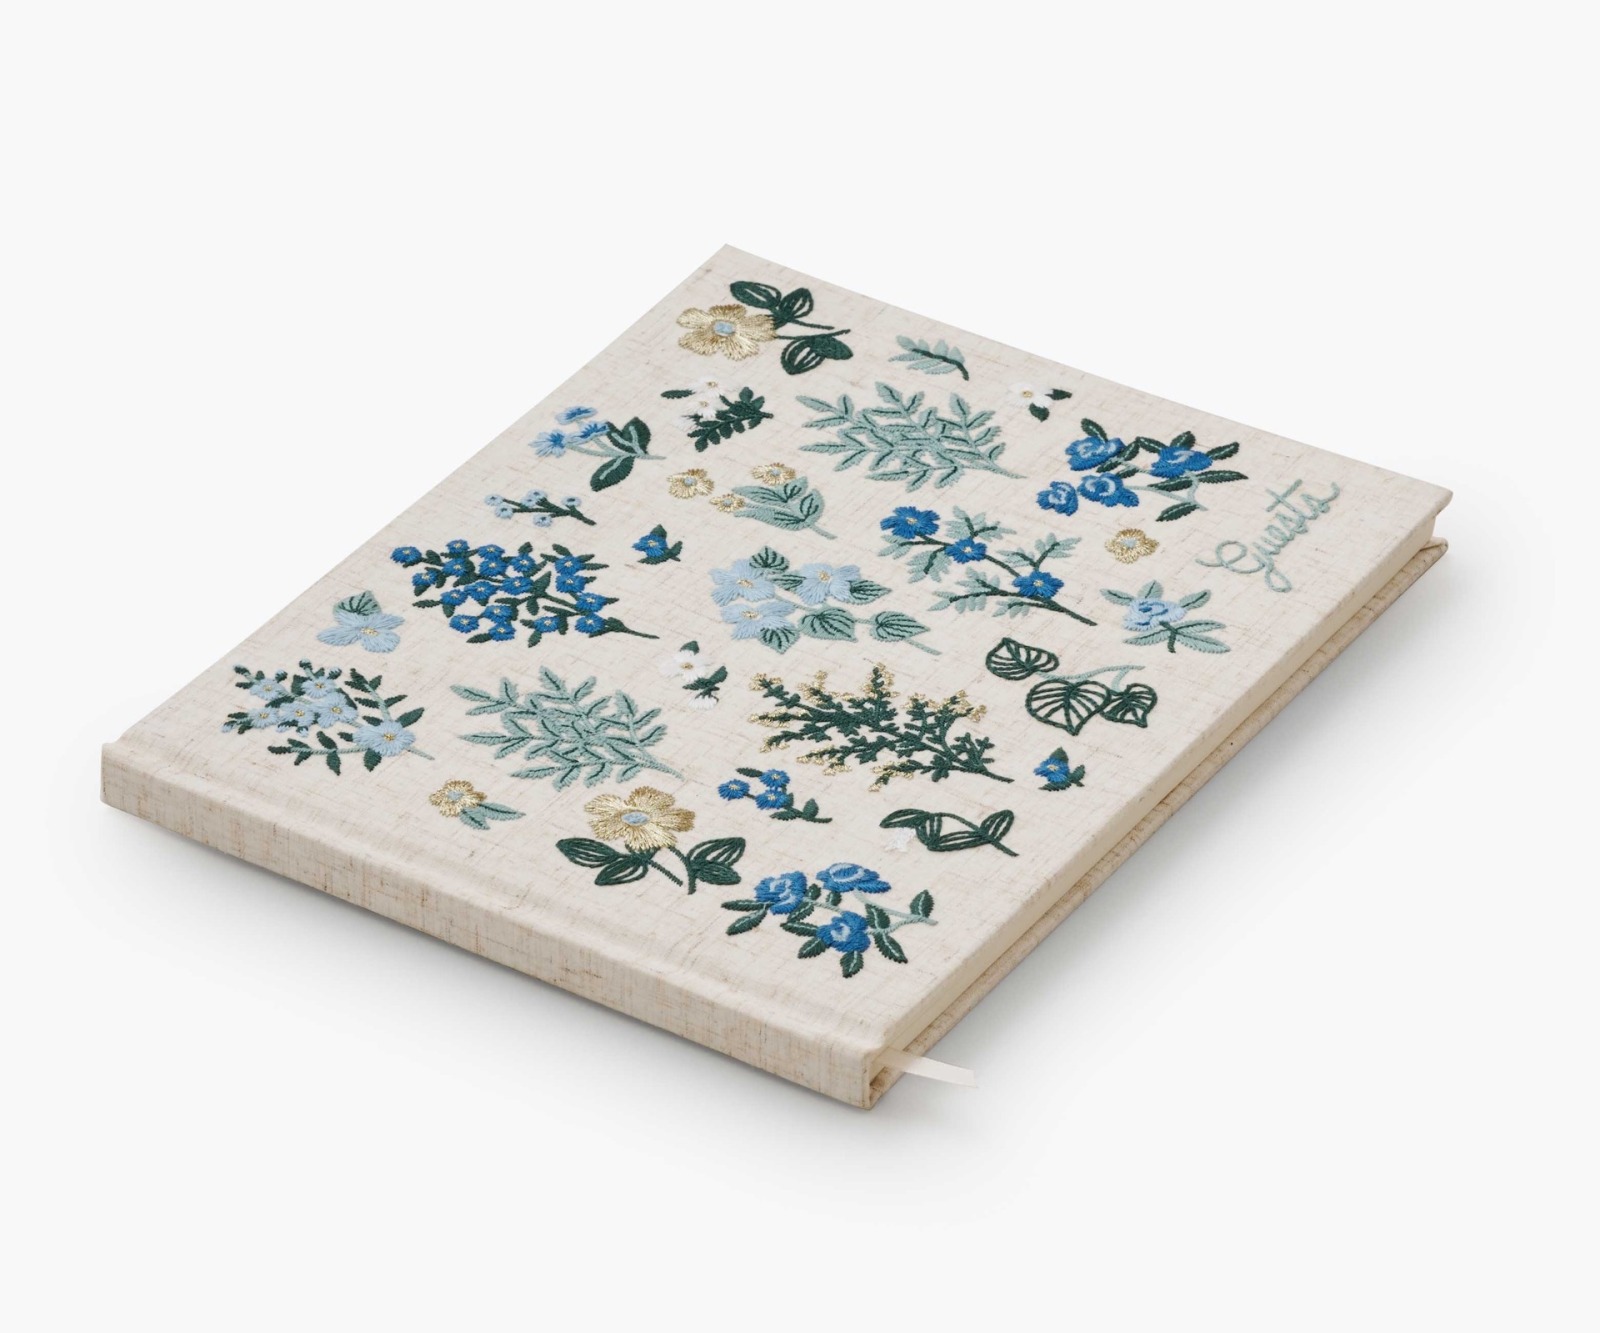 Wildwood Embroidered Guest Book 3